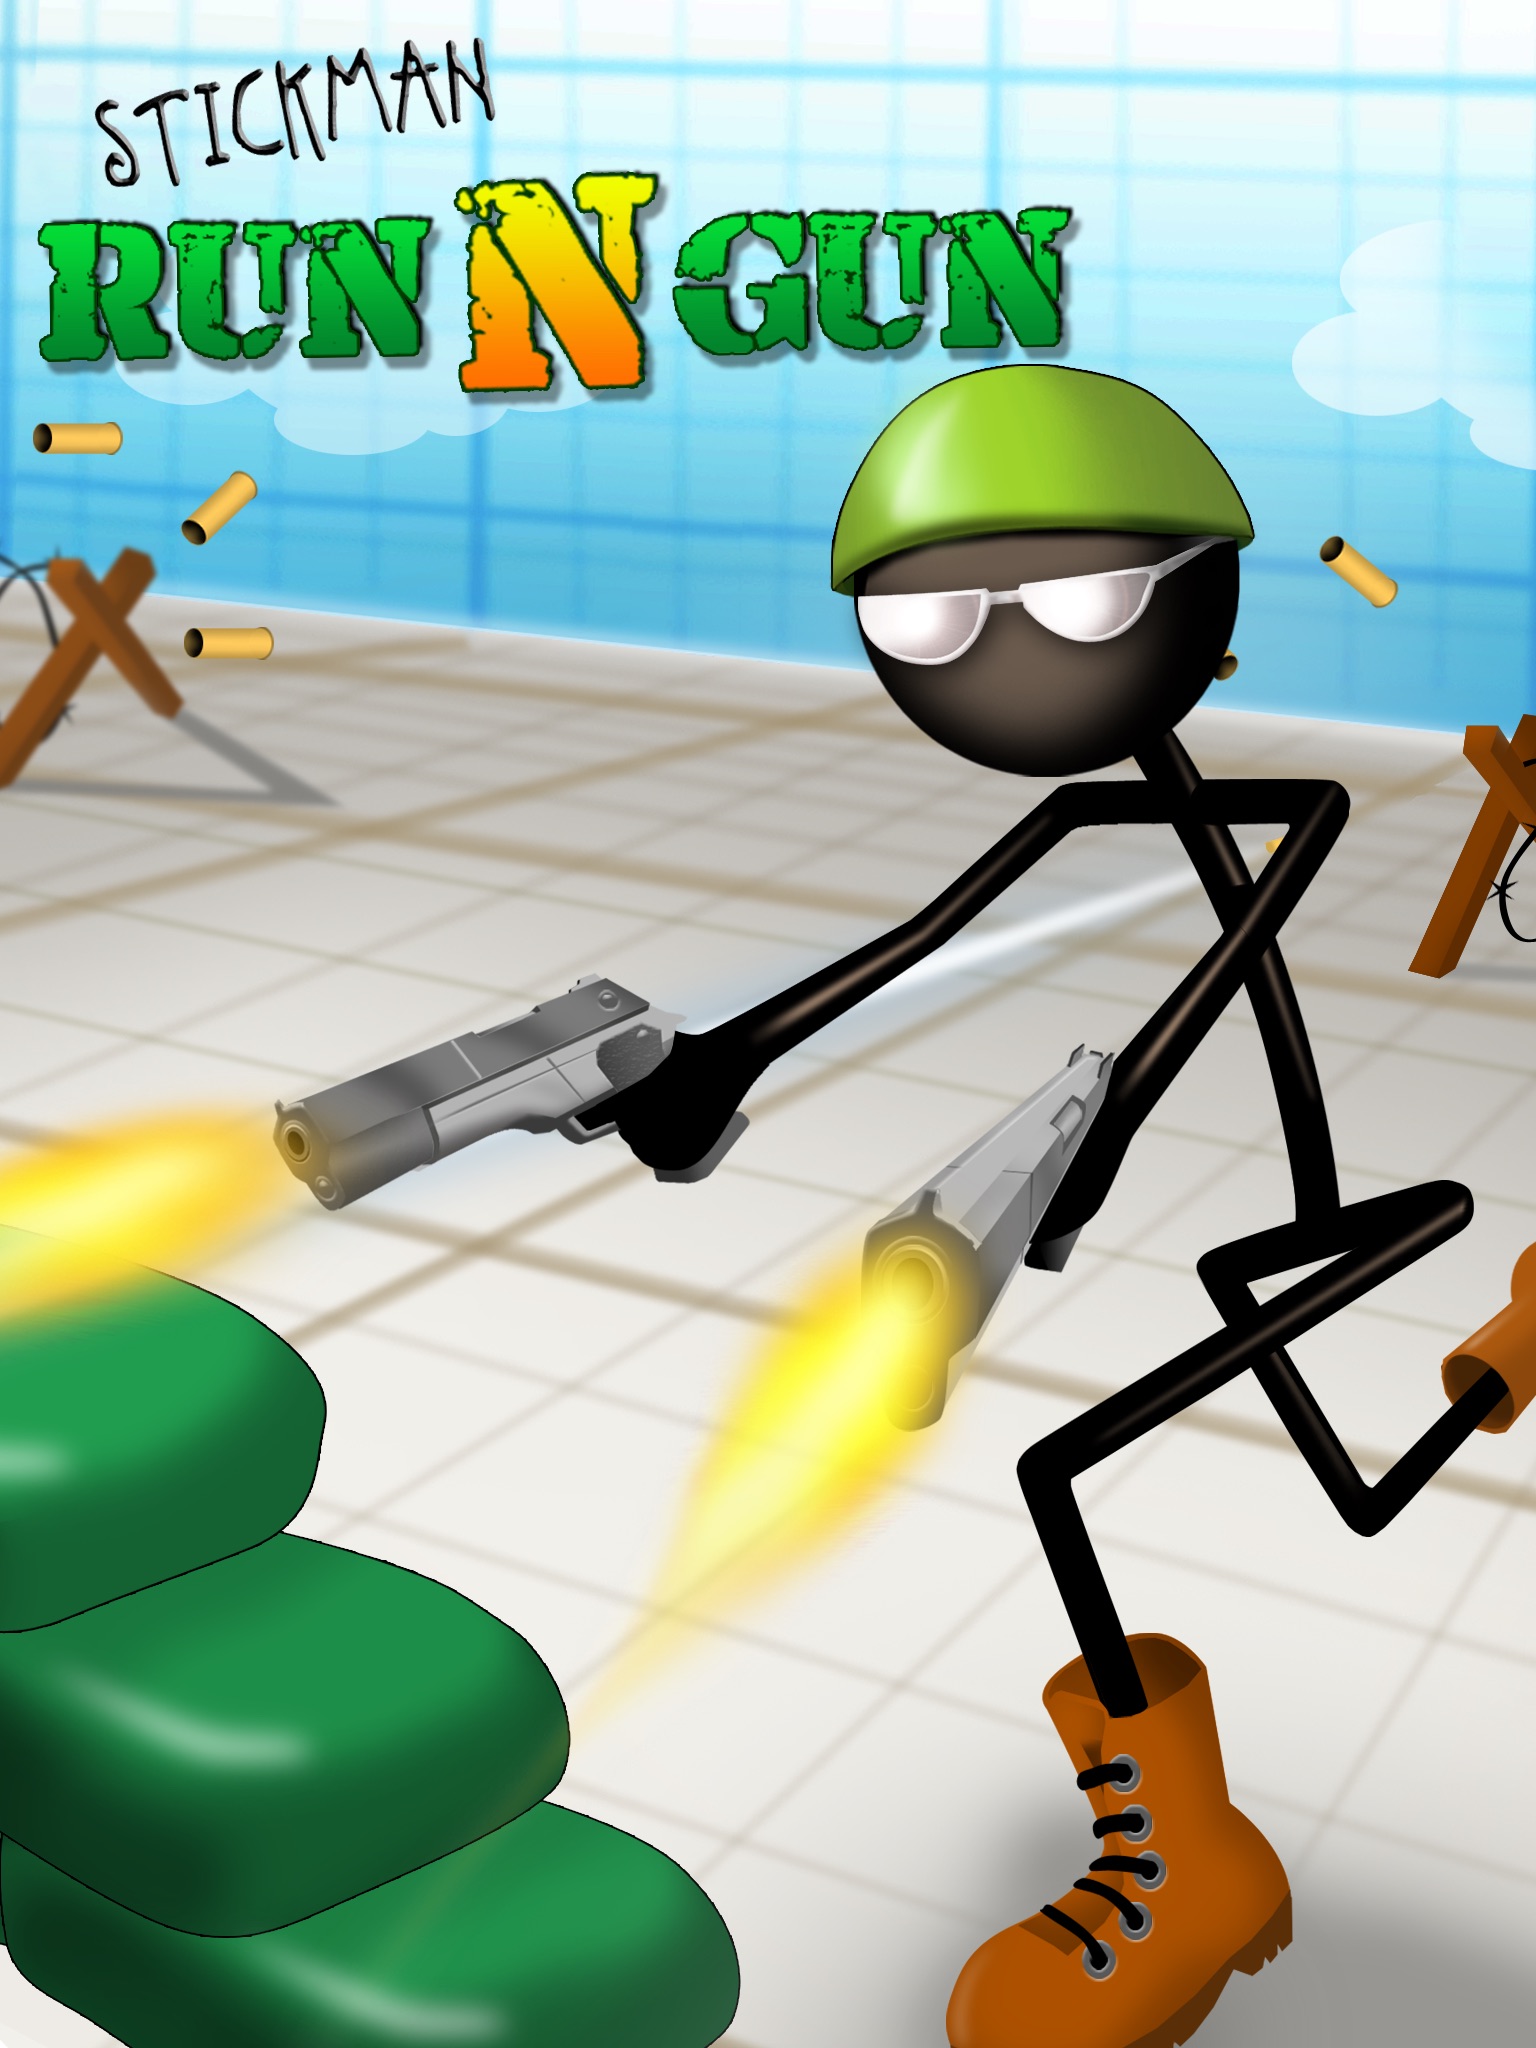 Stickman Run n Gun at App Store downloads and cost estimates and app analyse by AppStorio